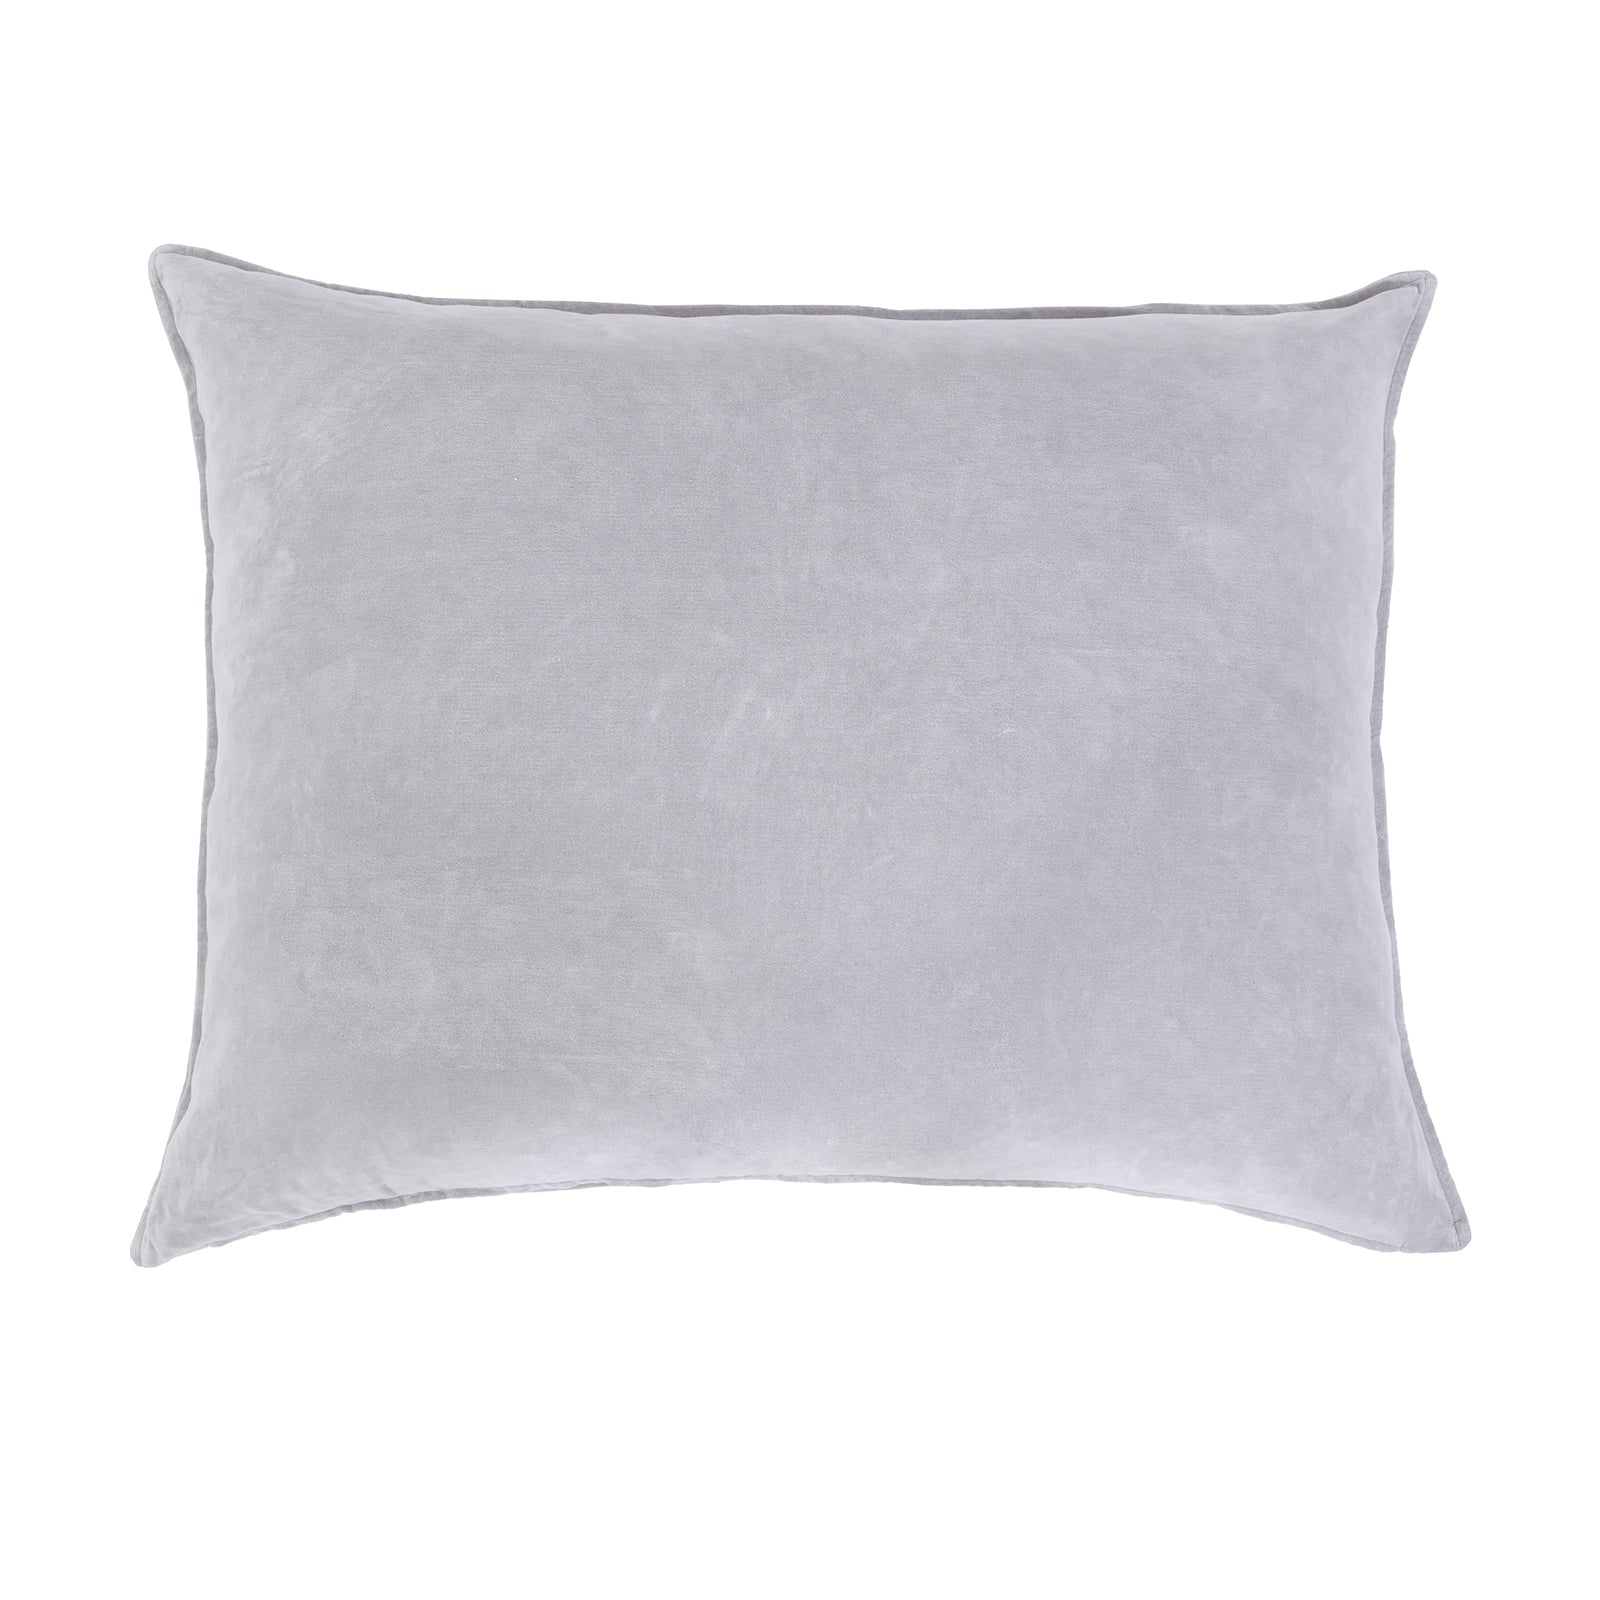 Bianca BIG PILLOW 28" X 36" WITH INSERT - Grey color - Pom pom At Home